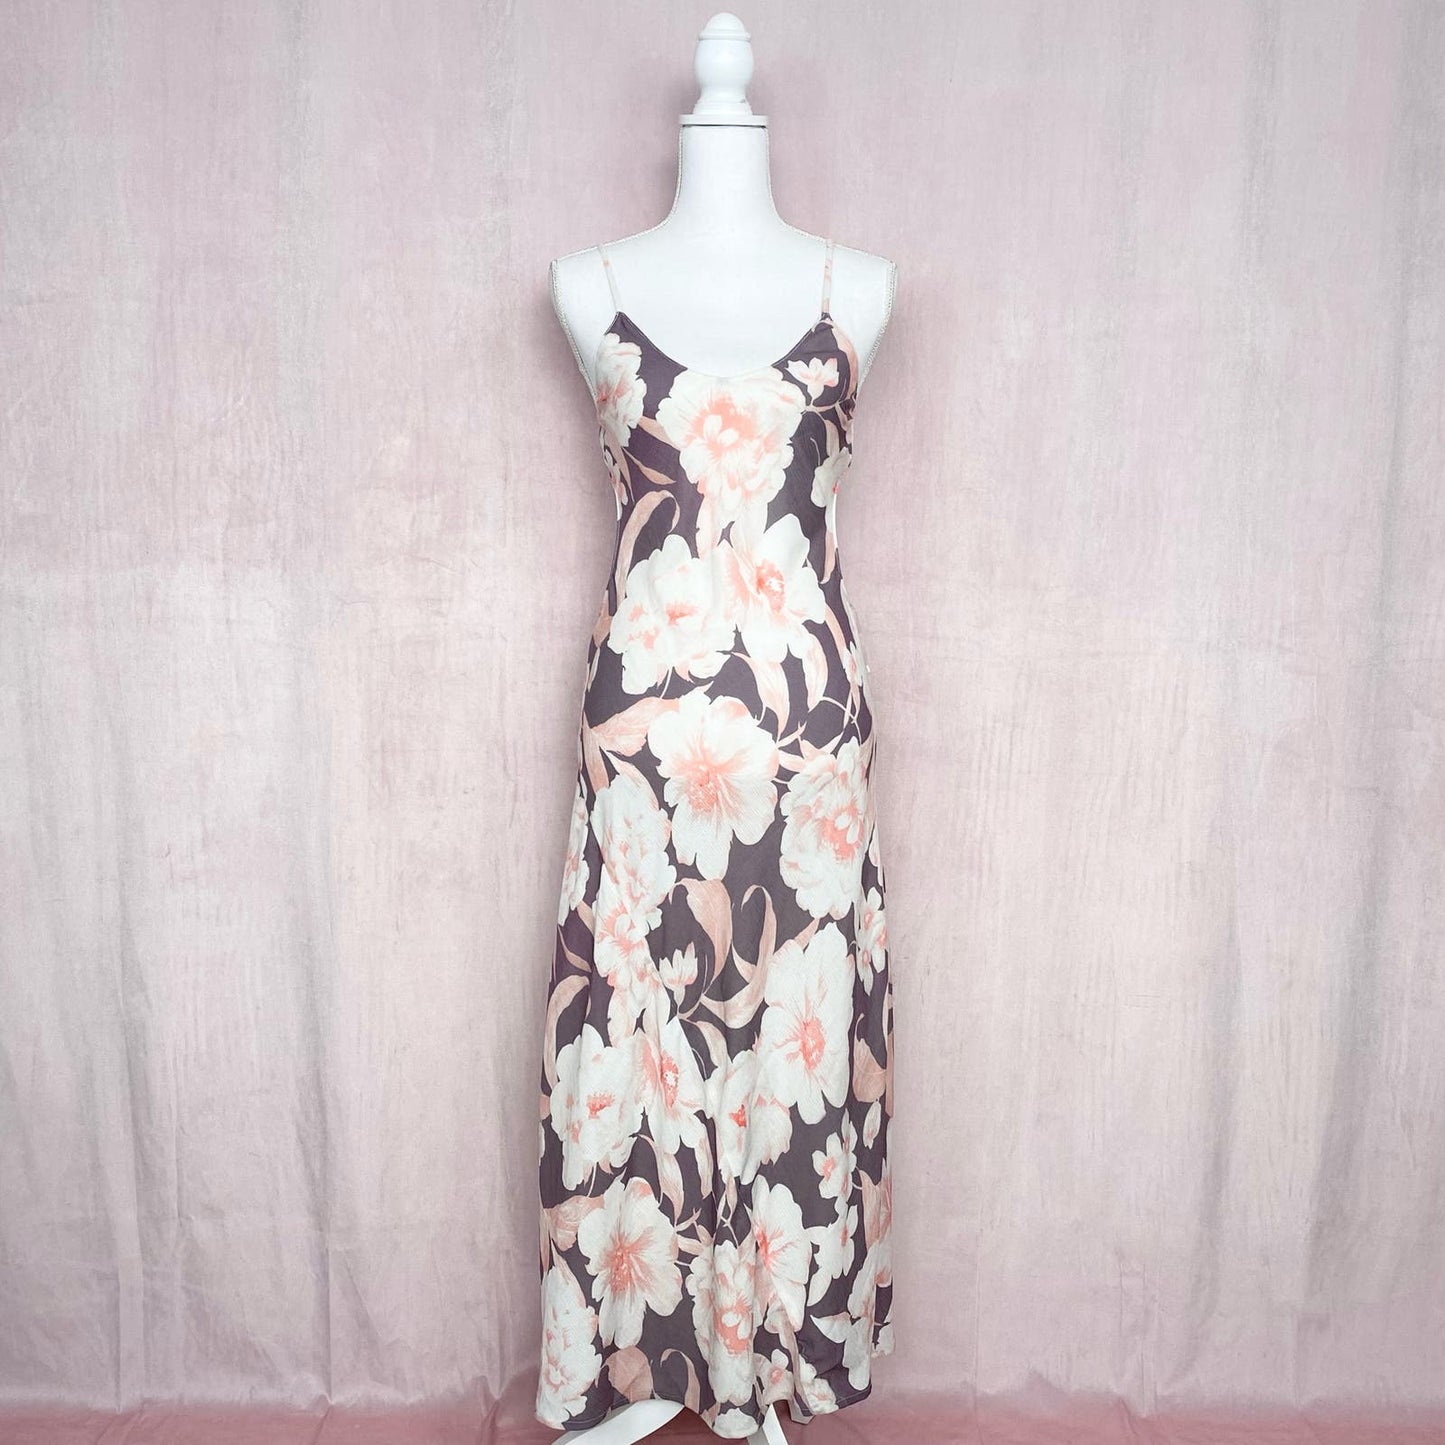 Secondhand Tropical Floral Open Back Maxi Dress, Size XS